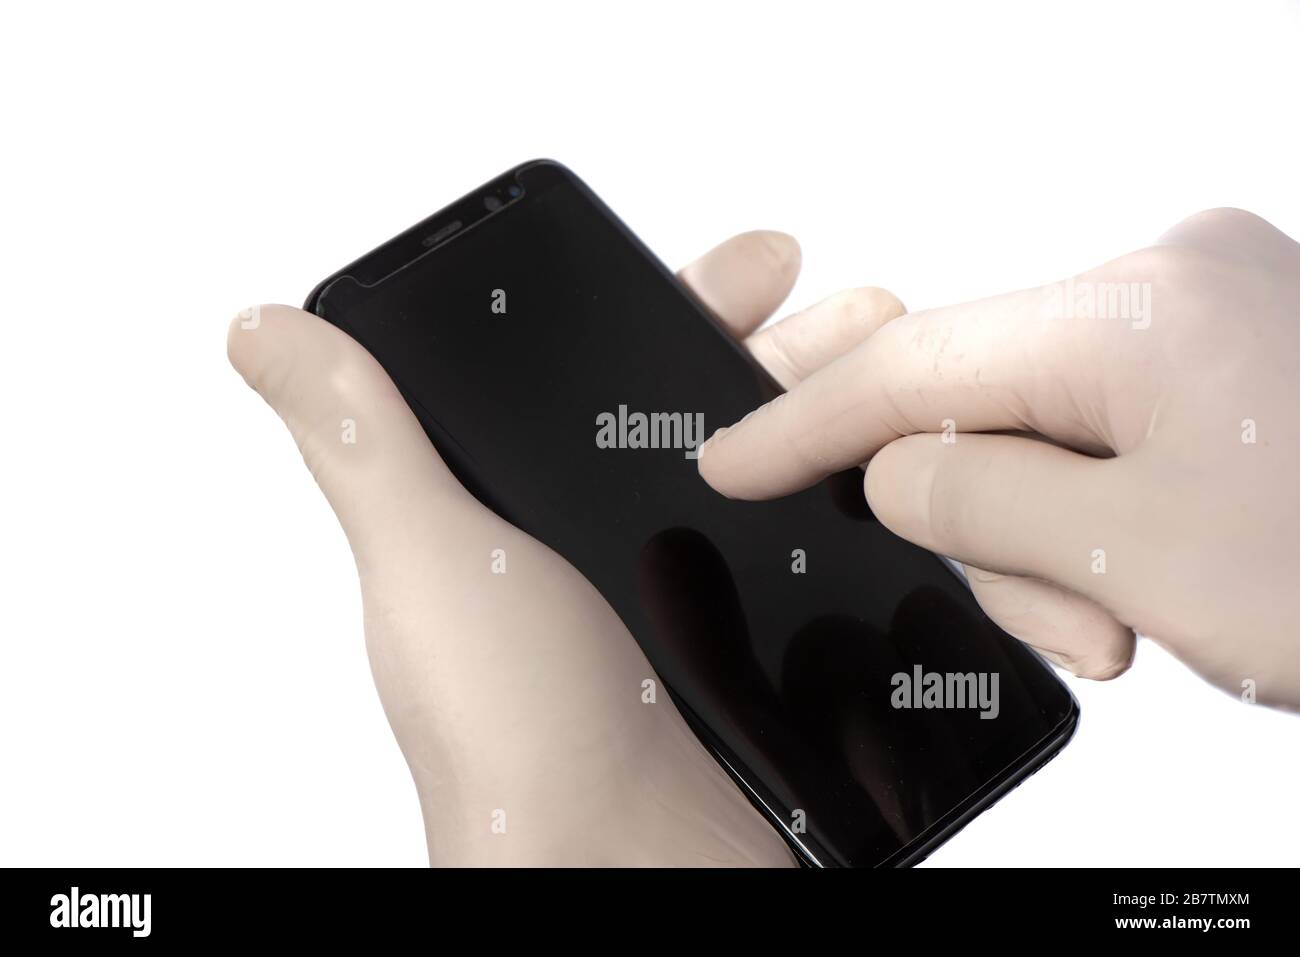 Using a cell phone with white protective gloves Stock Photo